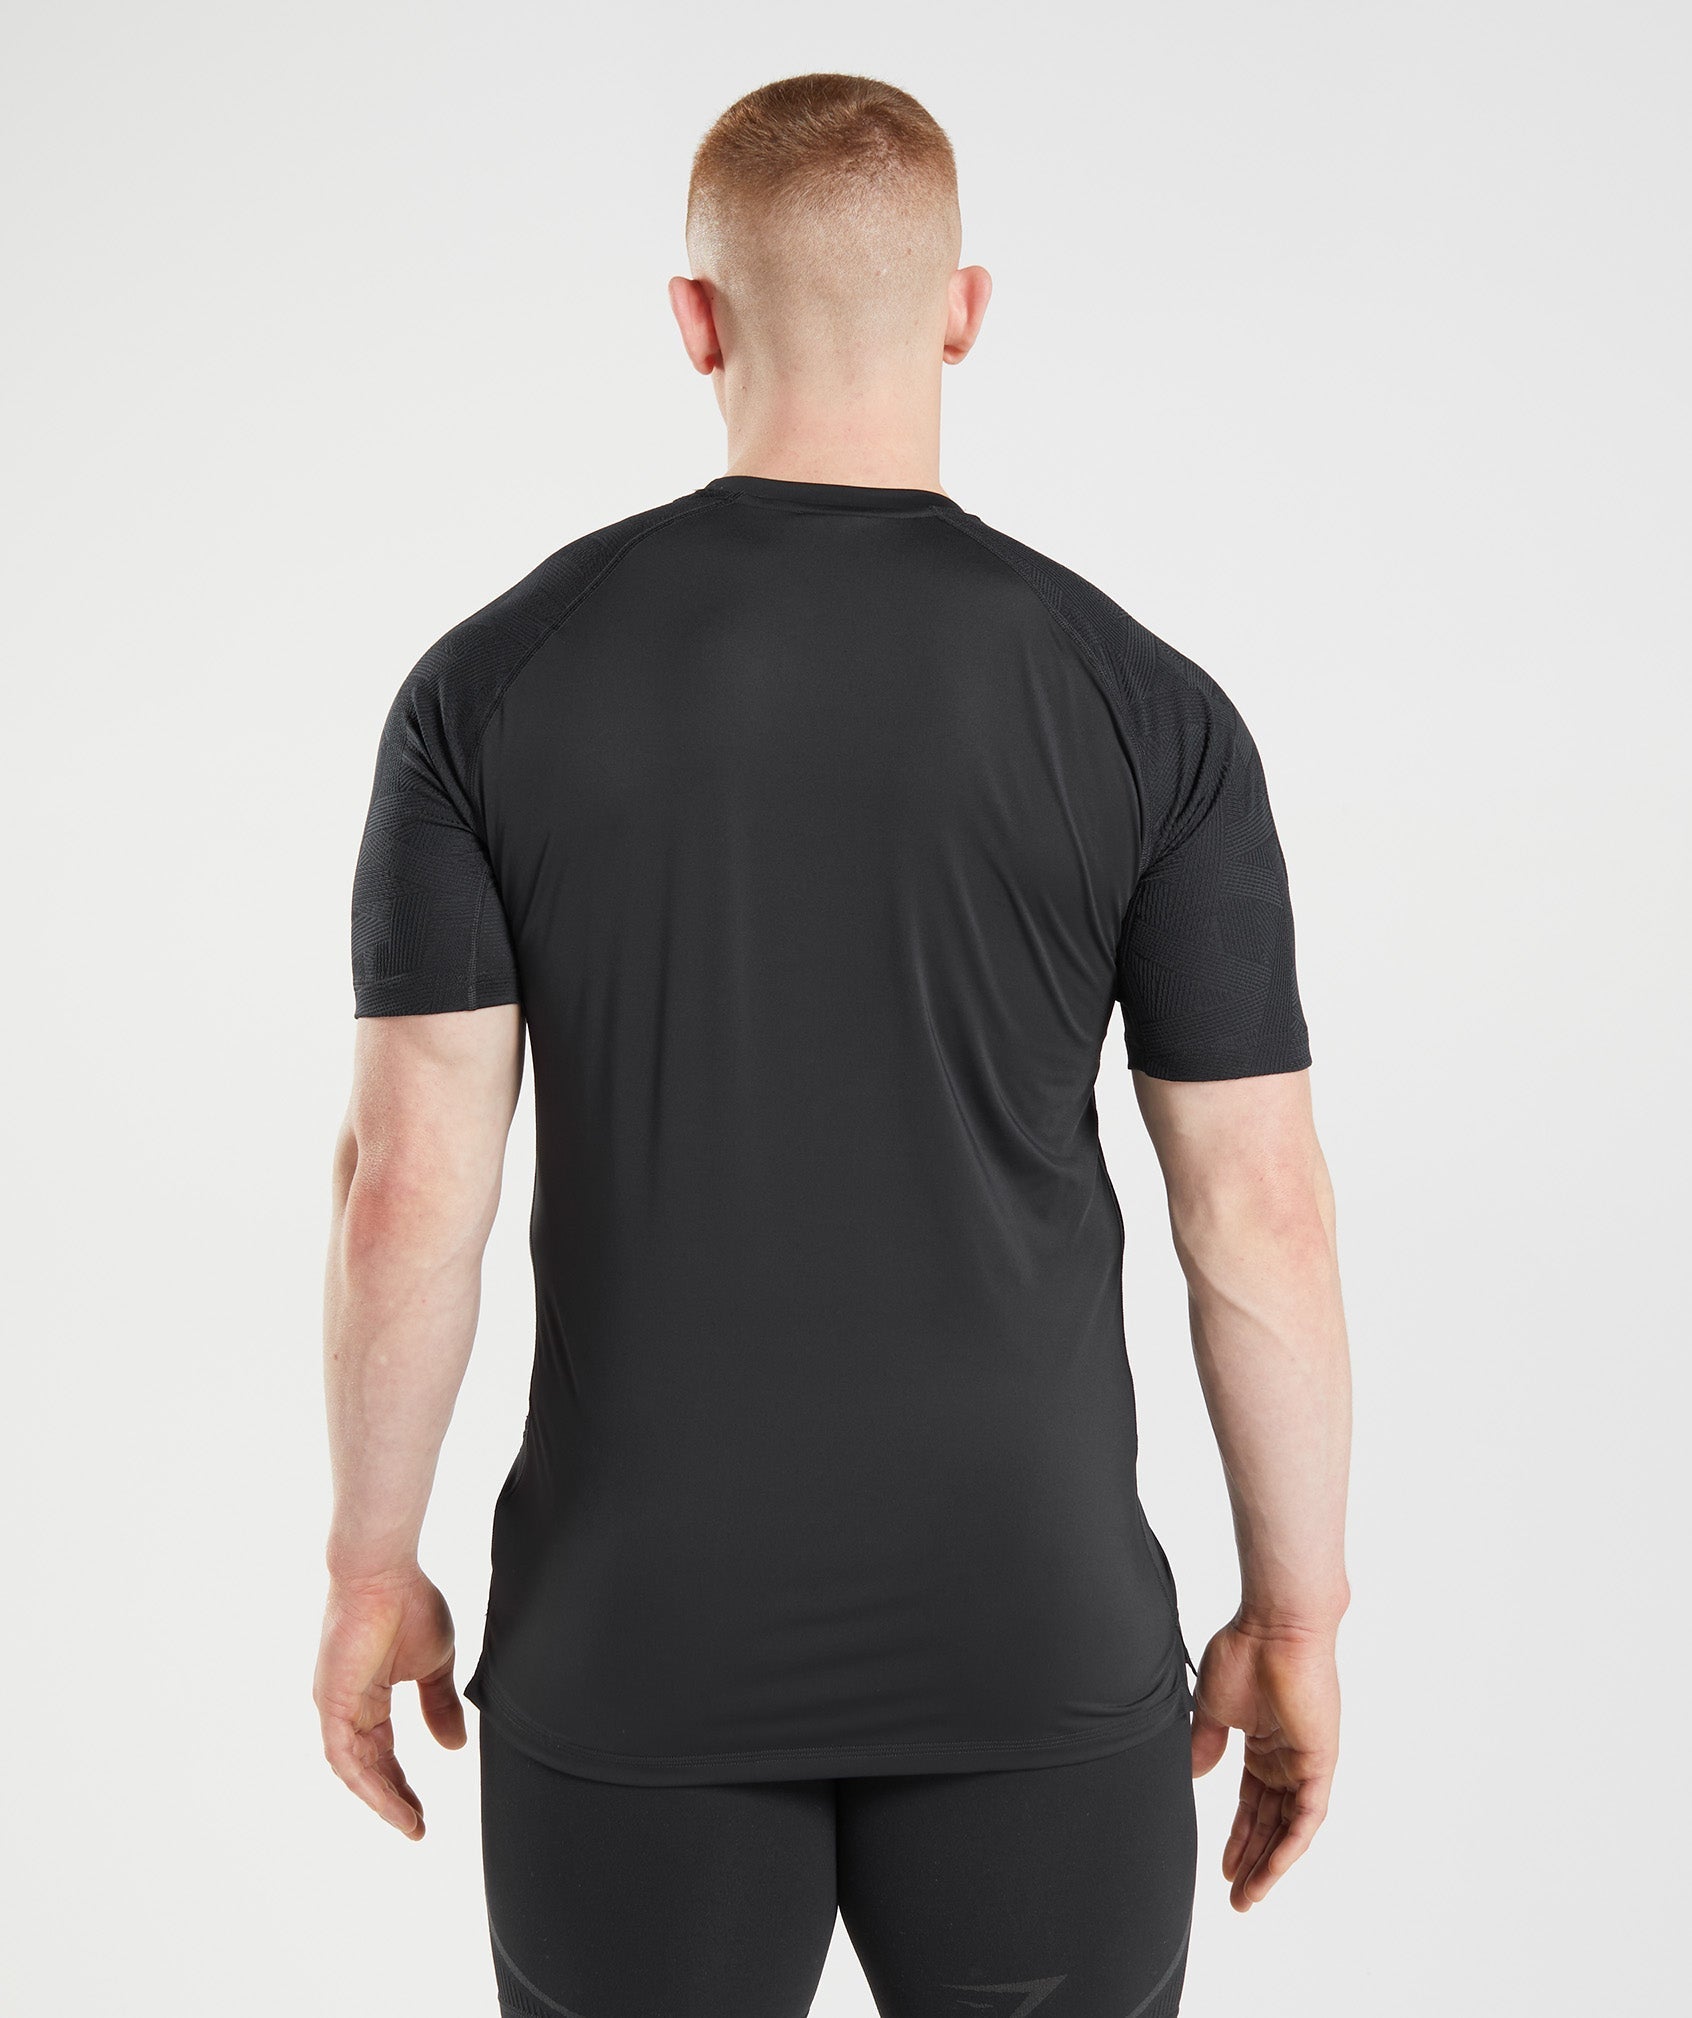 315 T-Shirt in Black - view 2